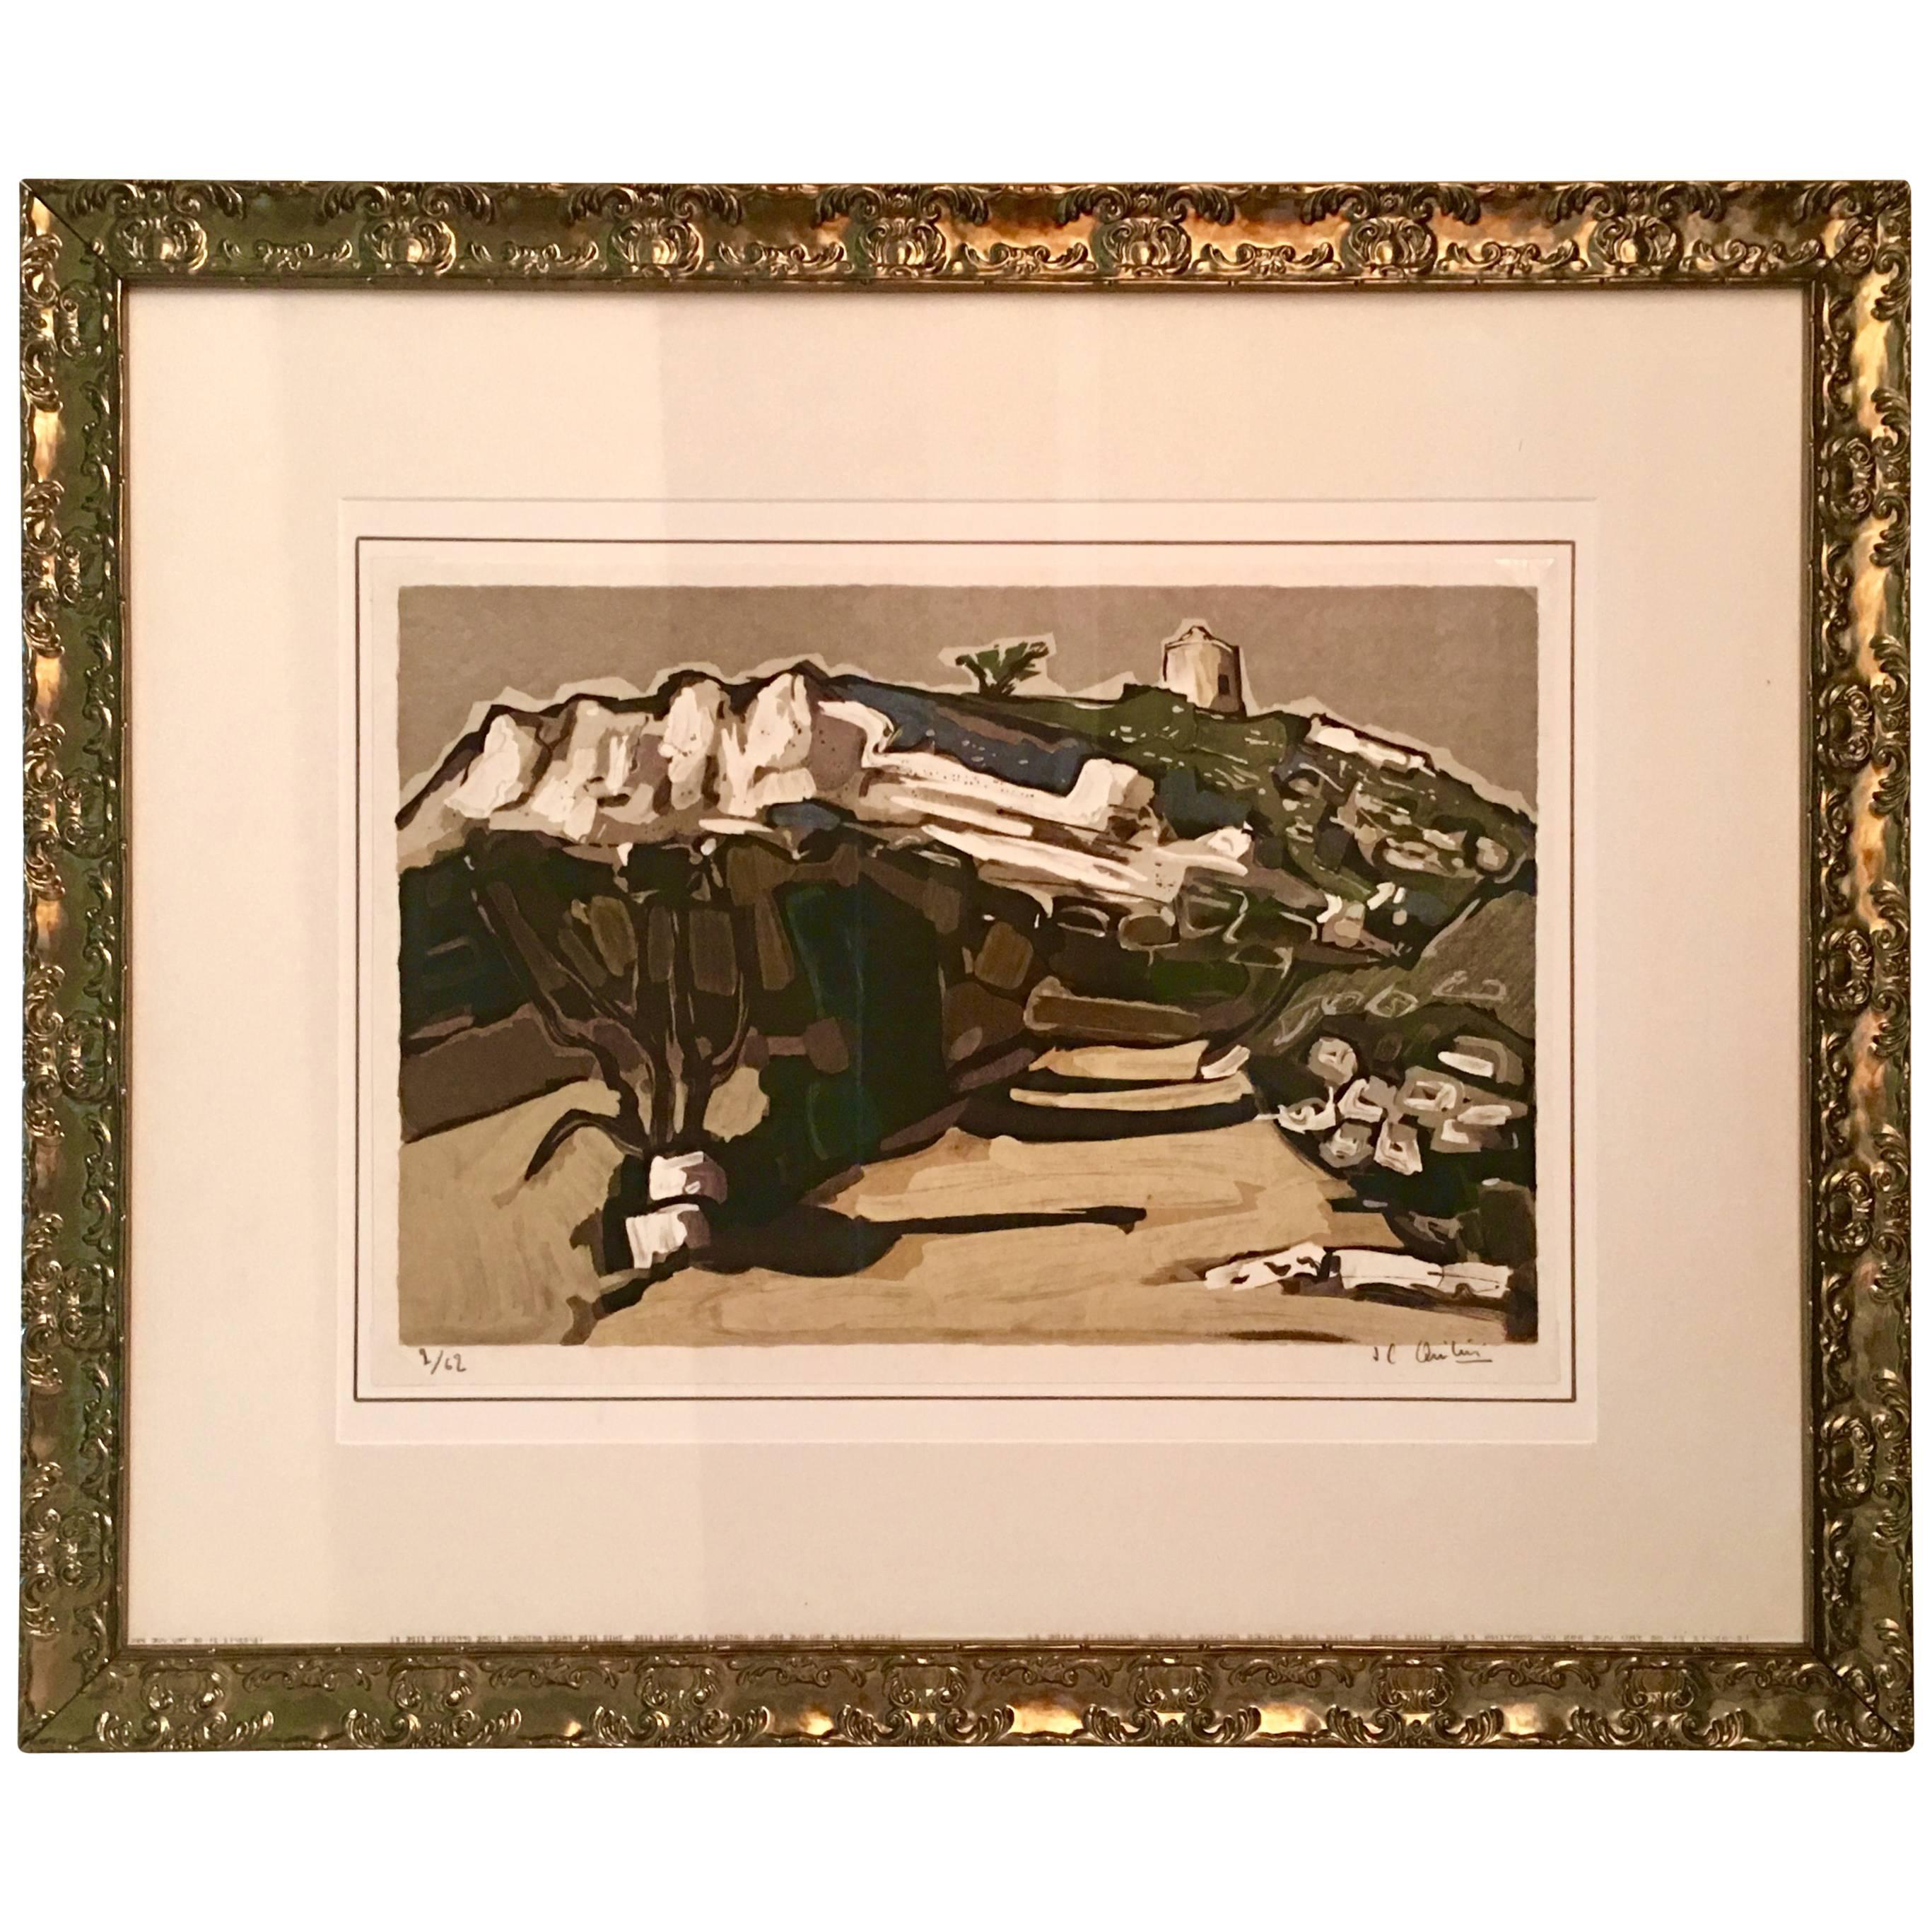 Original Lithograph "Le Pigeognier" by Jean Claude Quilici, Signed 2/62 For Sale